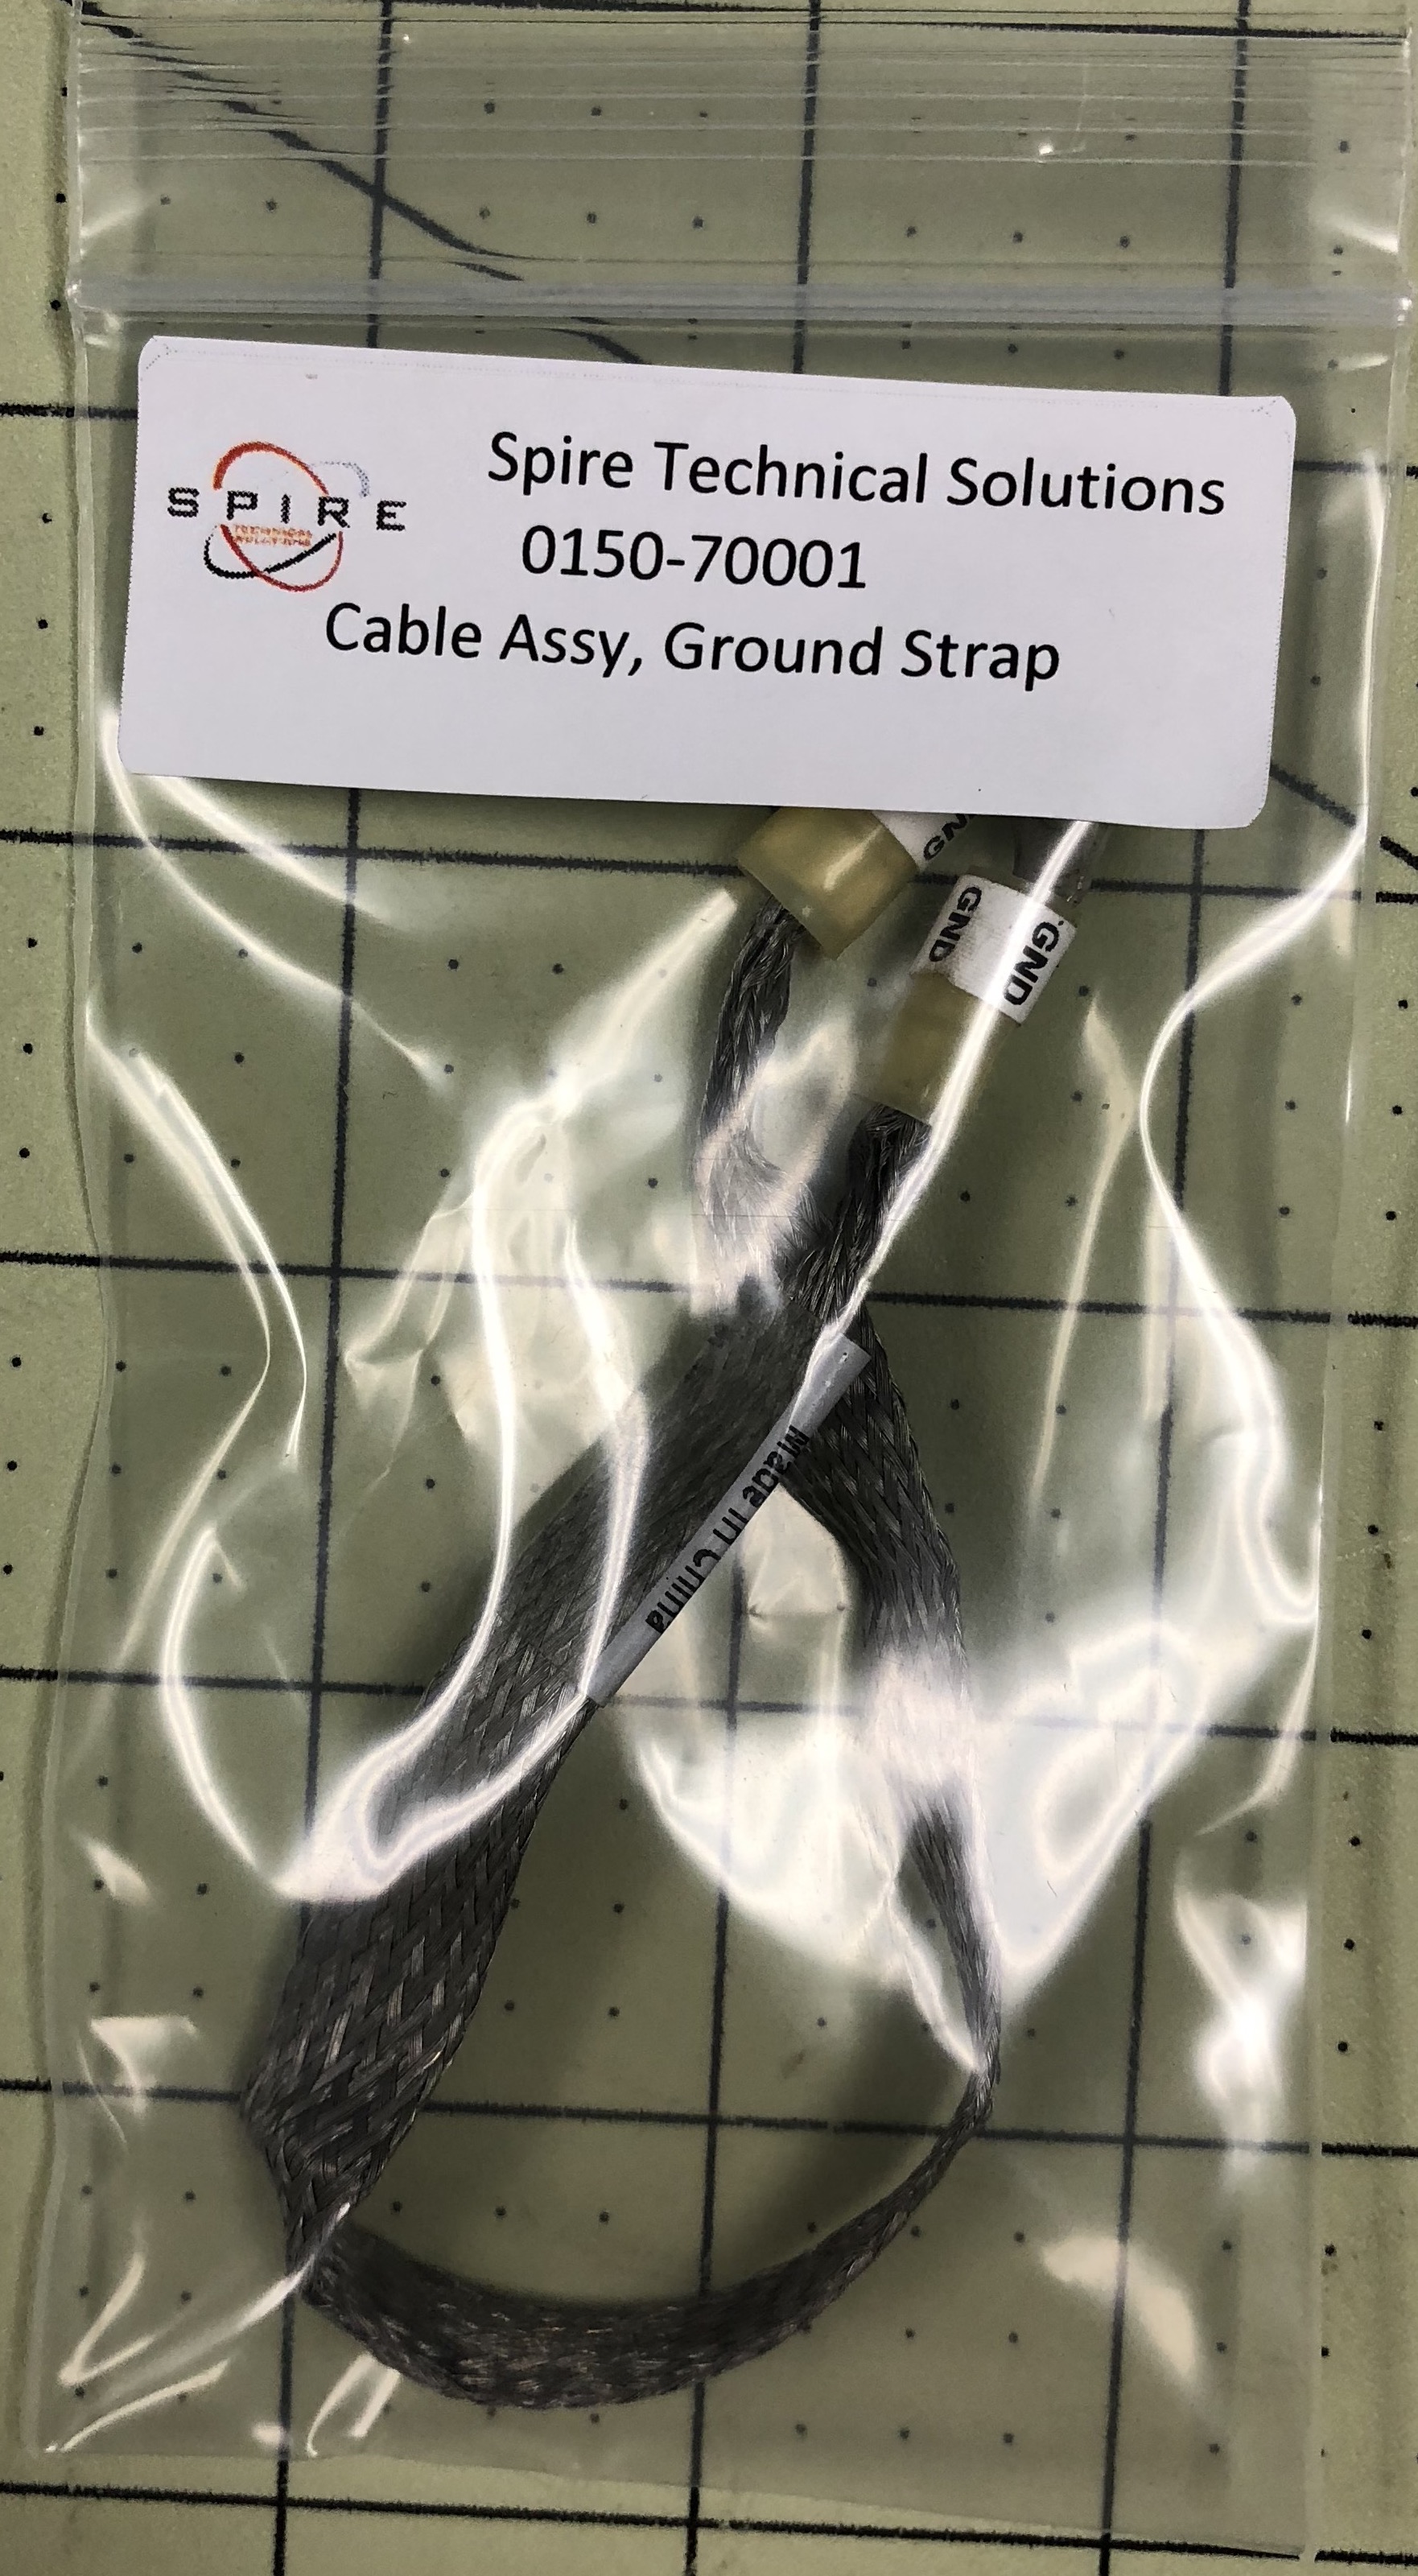 Cable Assy, Ground Strap